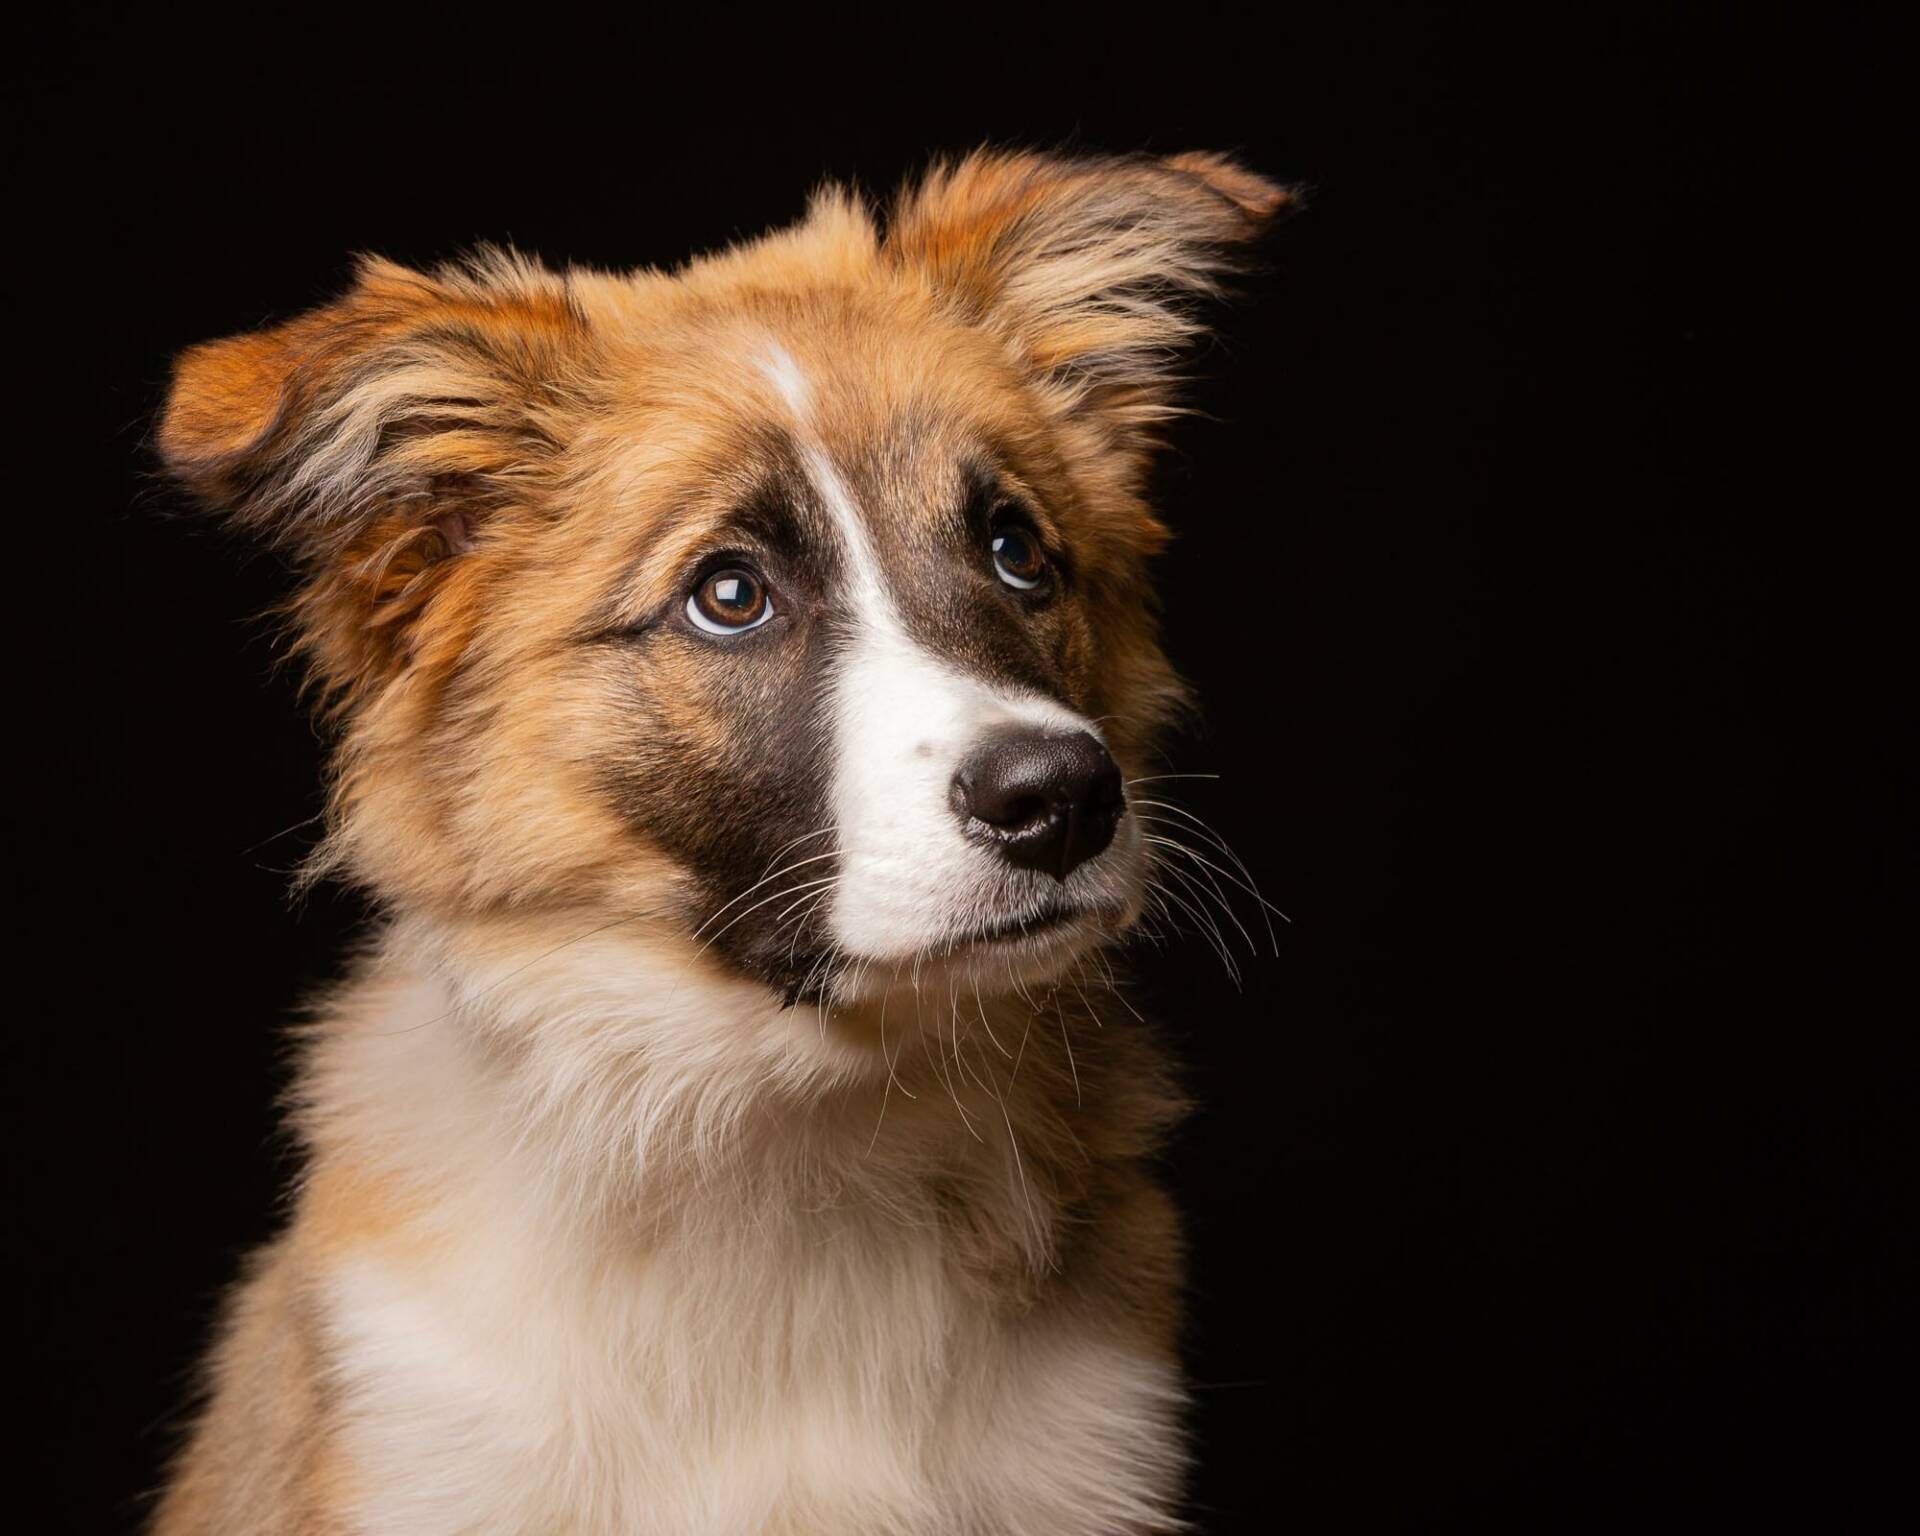 Border Collie Dog Portrait by Mark Hewitson of Mark Hewitson Photography, Thame, Oxfordshire